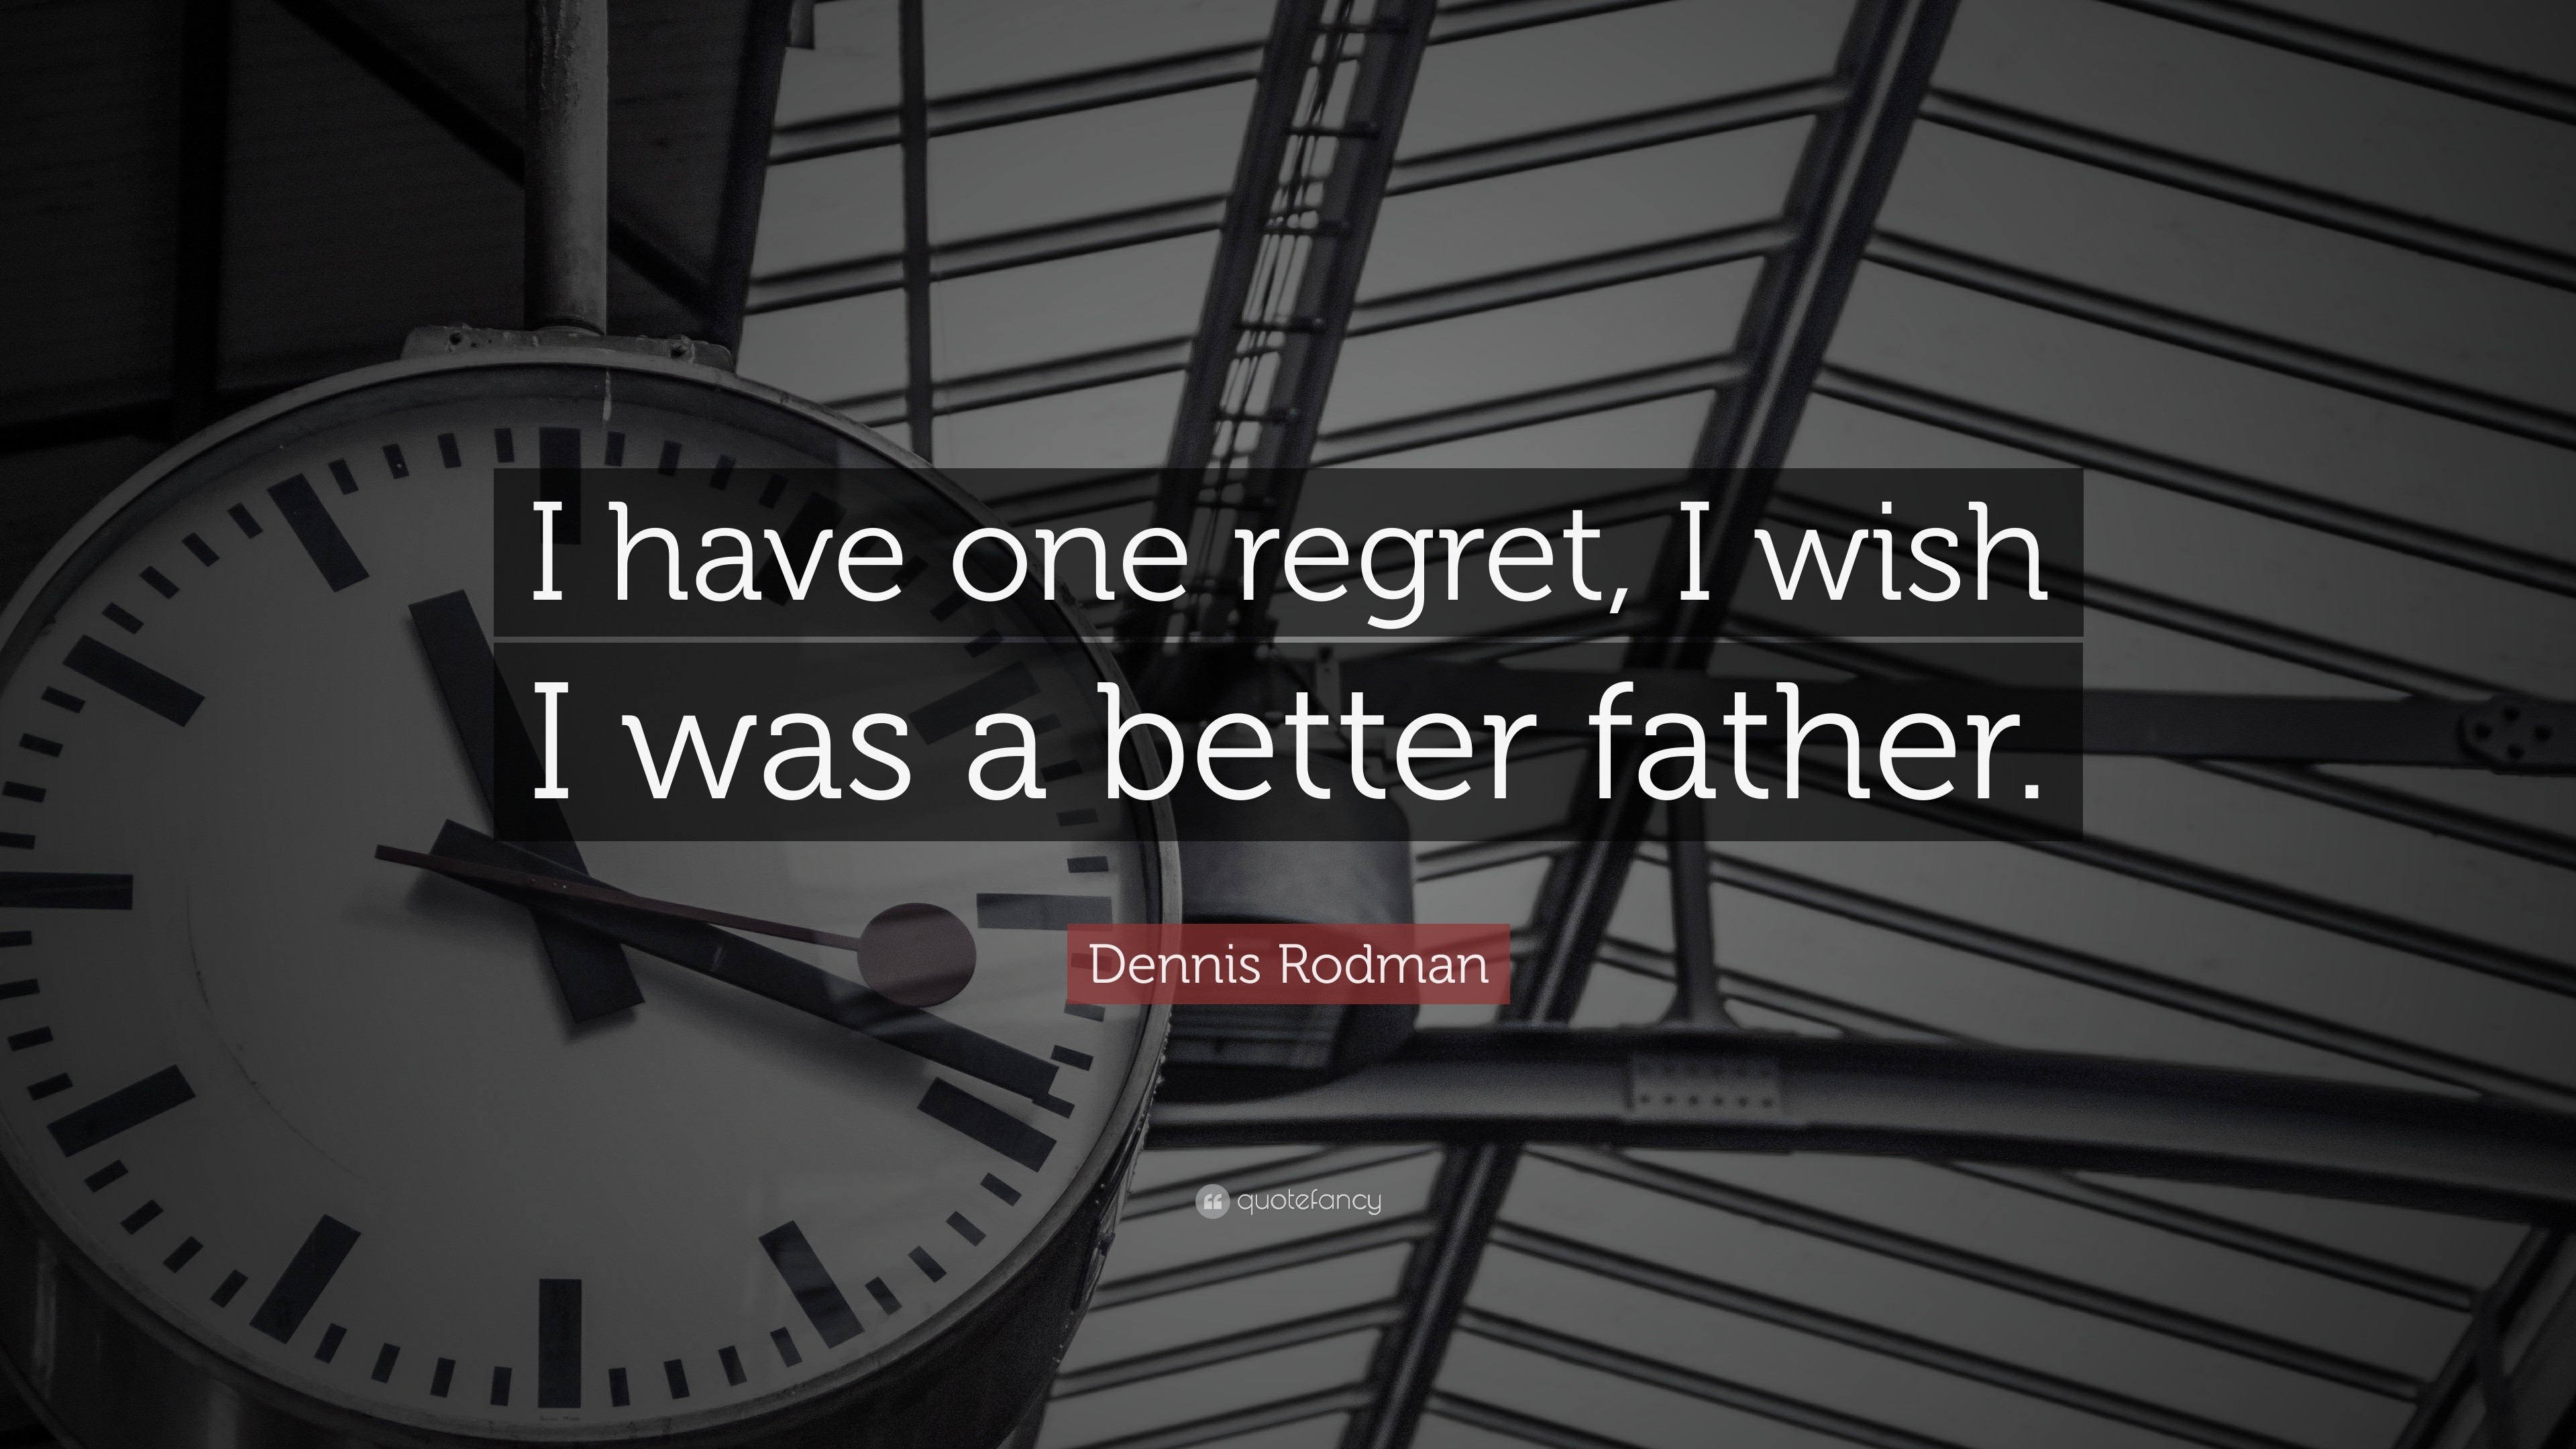 3840x2160 Dennis Rodman Quote: “I have one regret, I wish I was a better